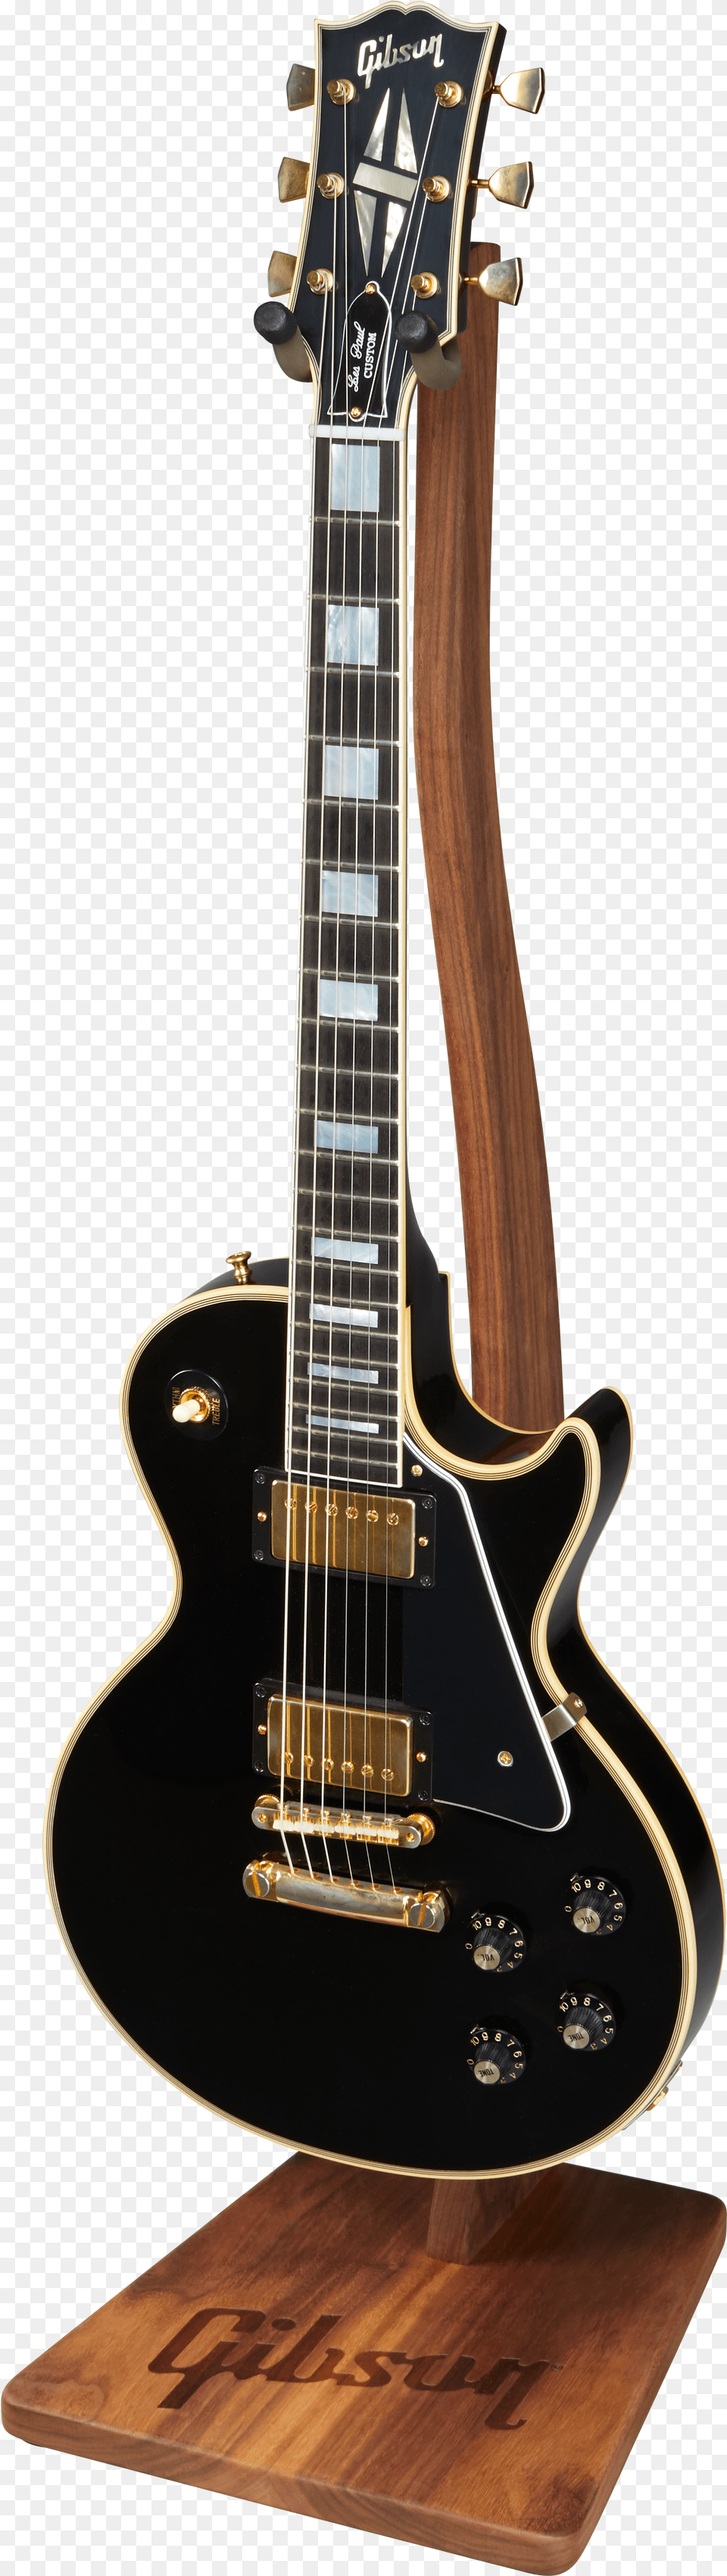 Gibson Guitar Stand Png